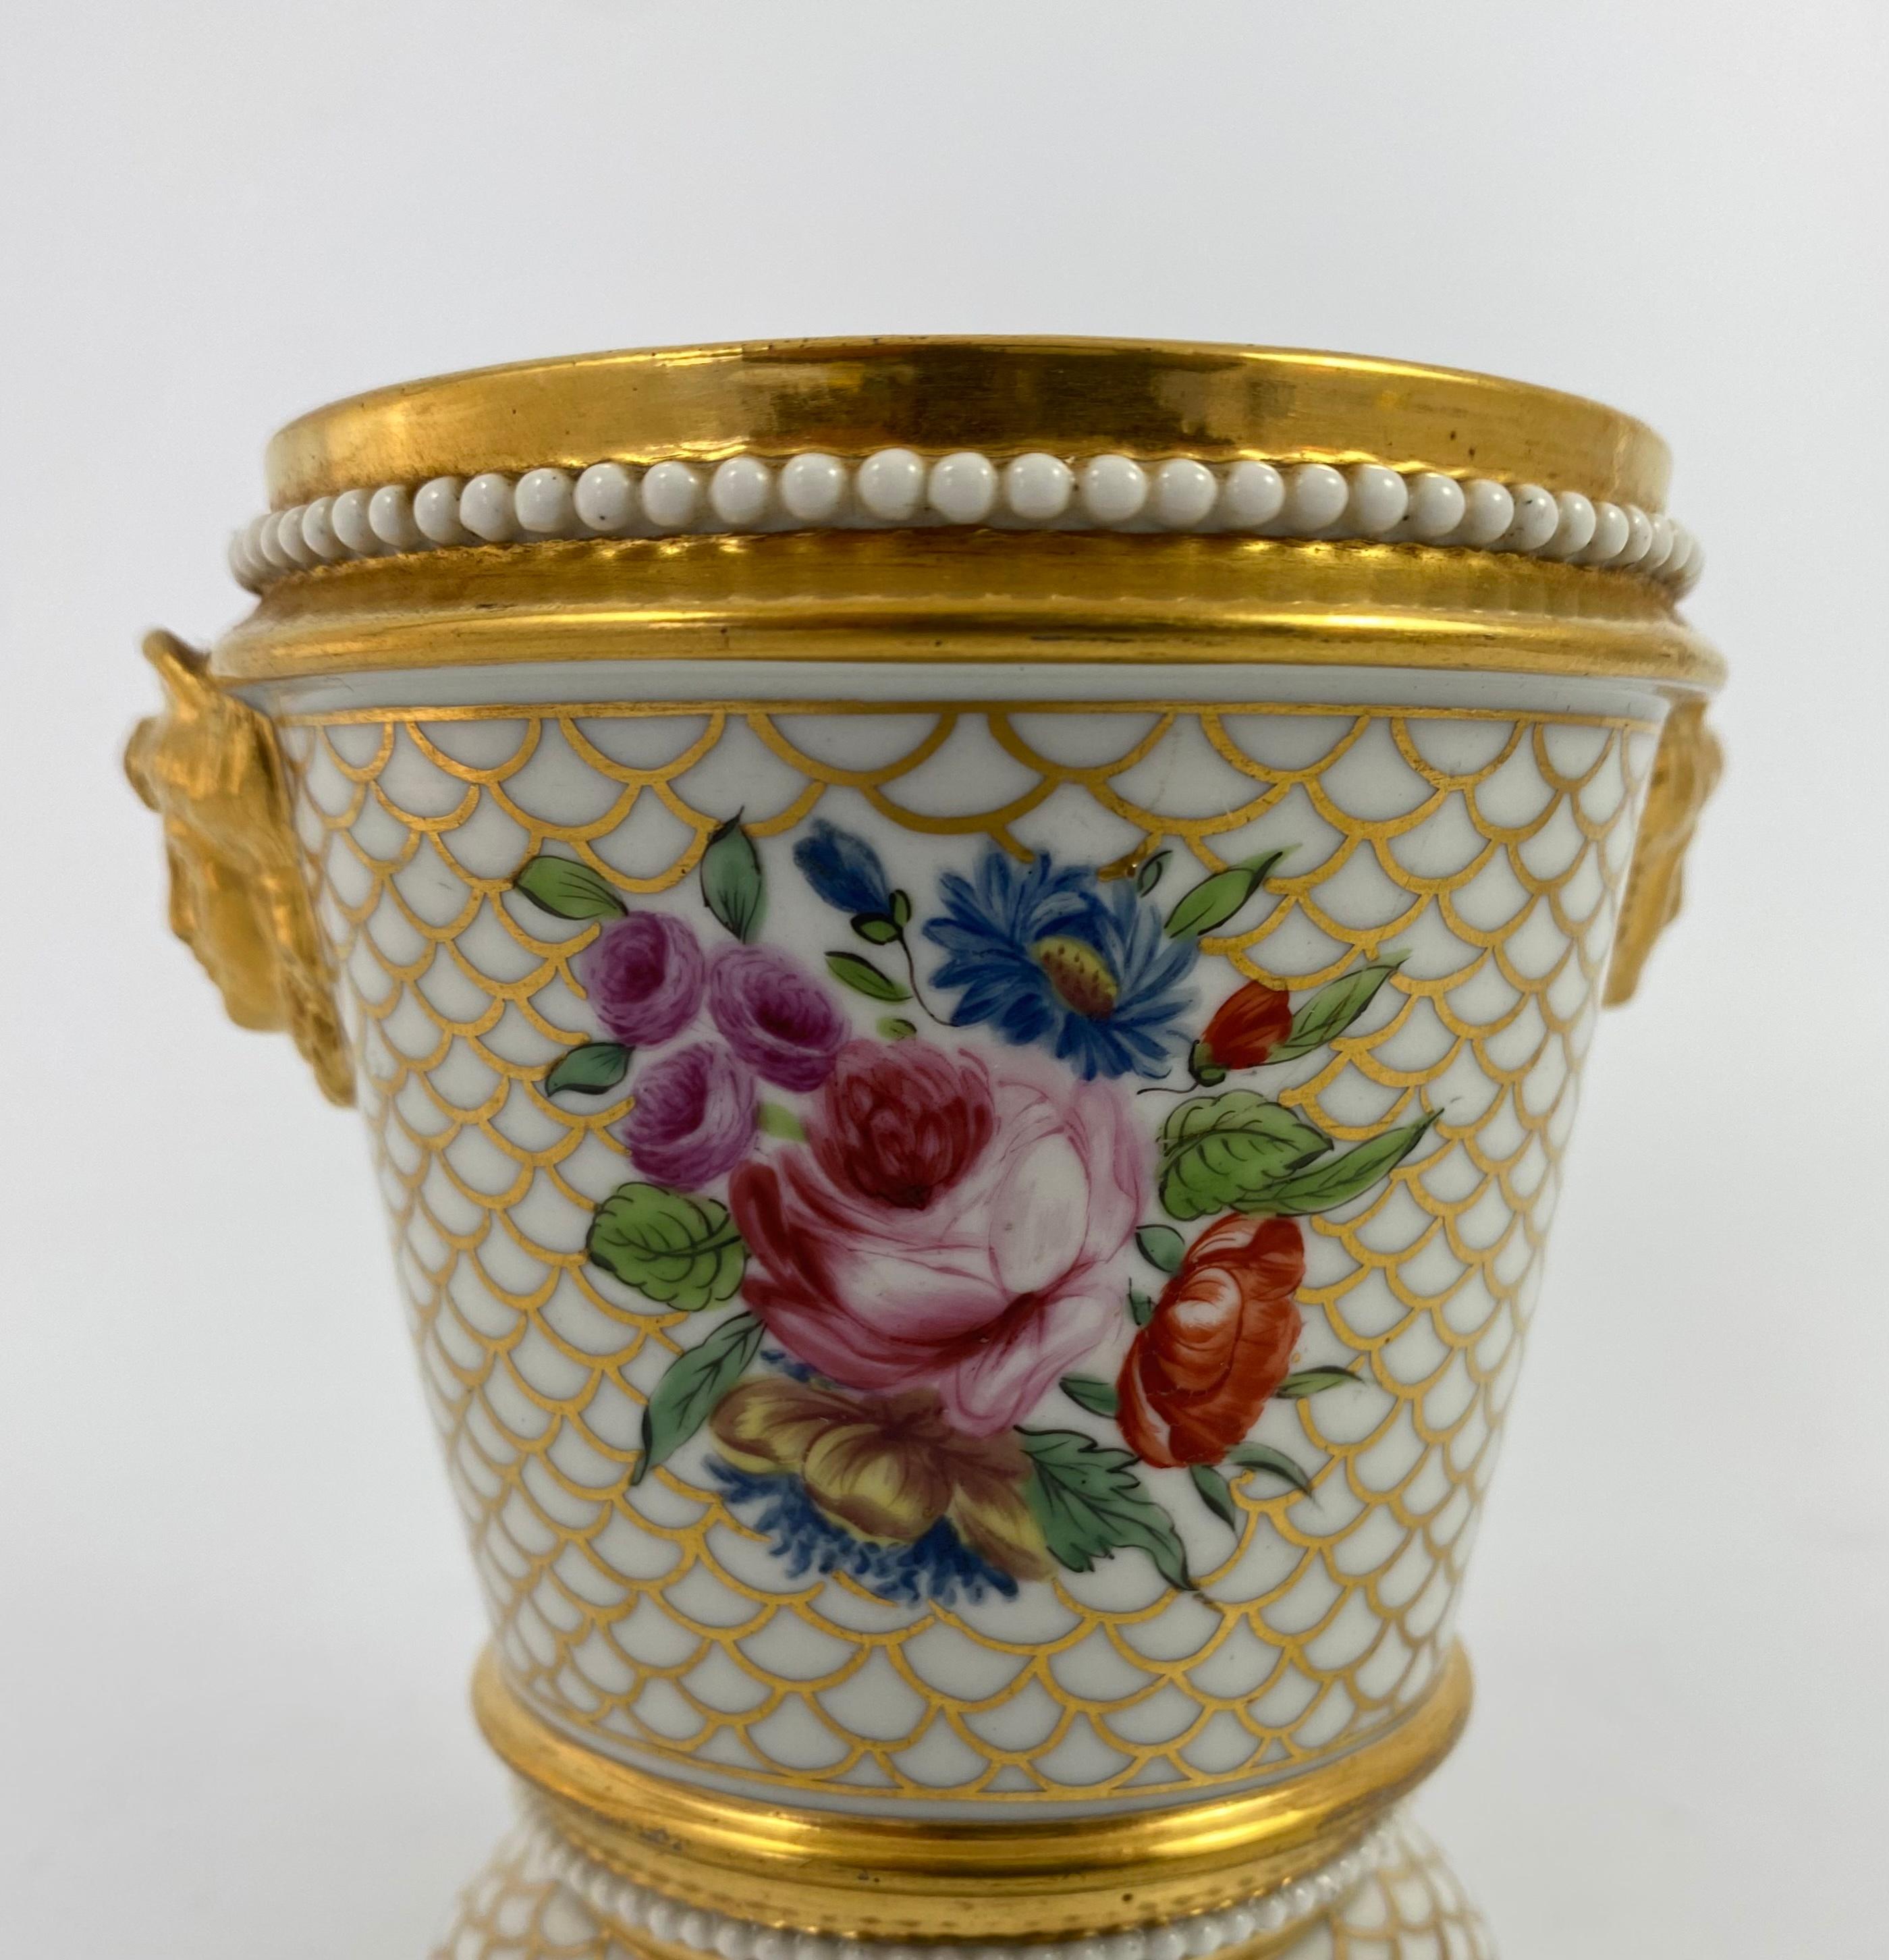 Early 19th Century English Porcelain Cache Pot and Cover, c. 1820